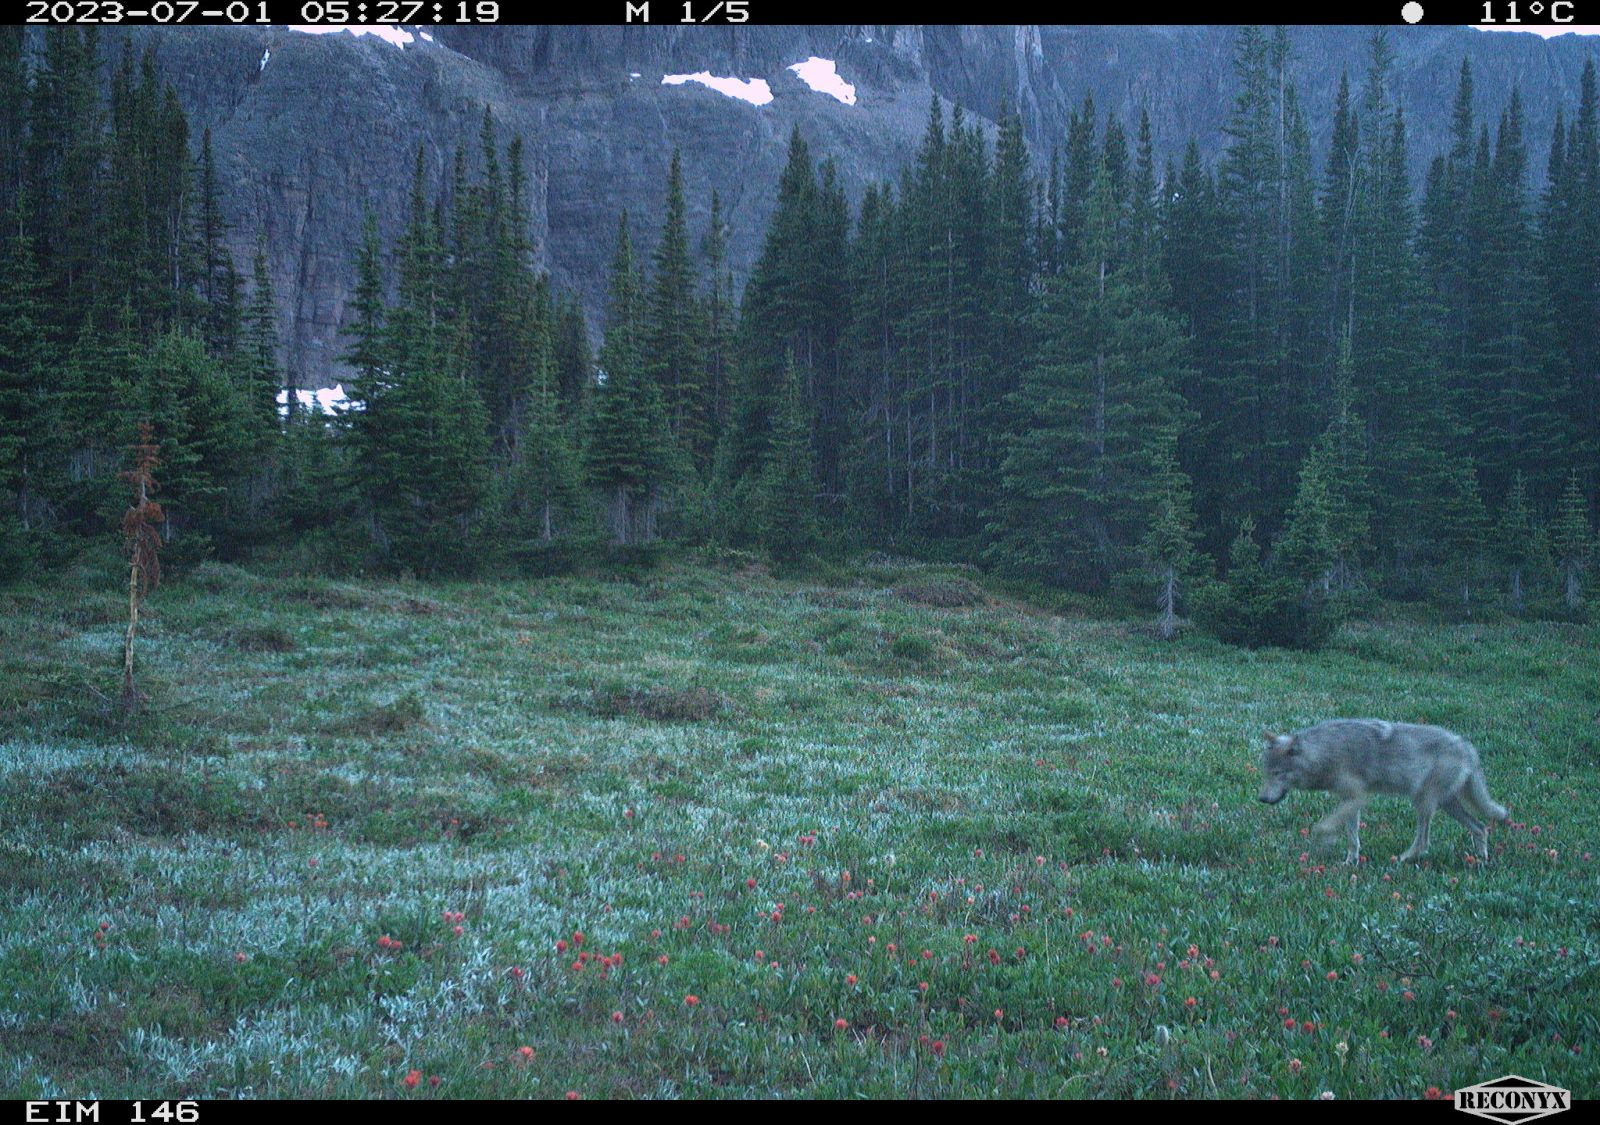 A remote camera image of grey coloured wolf.